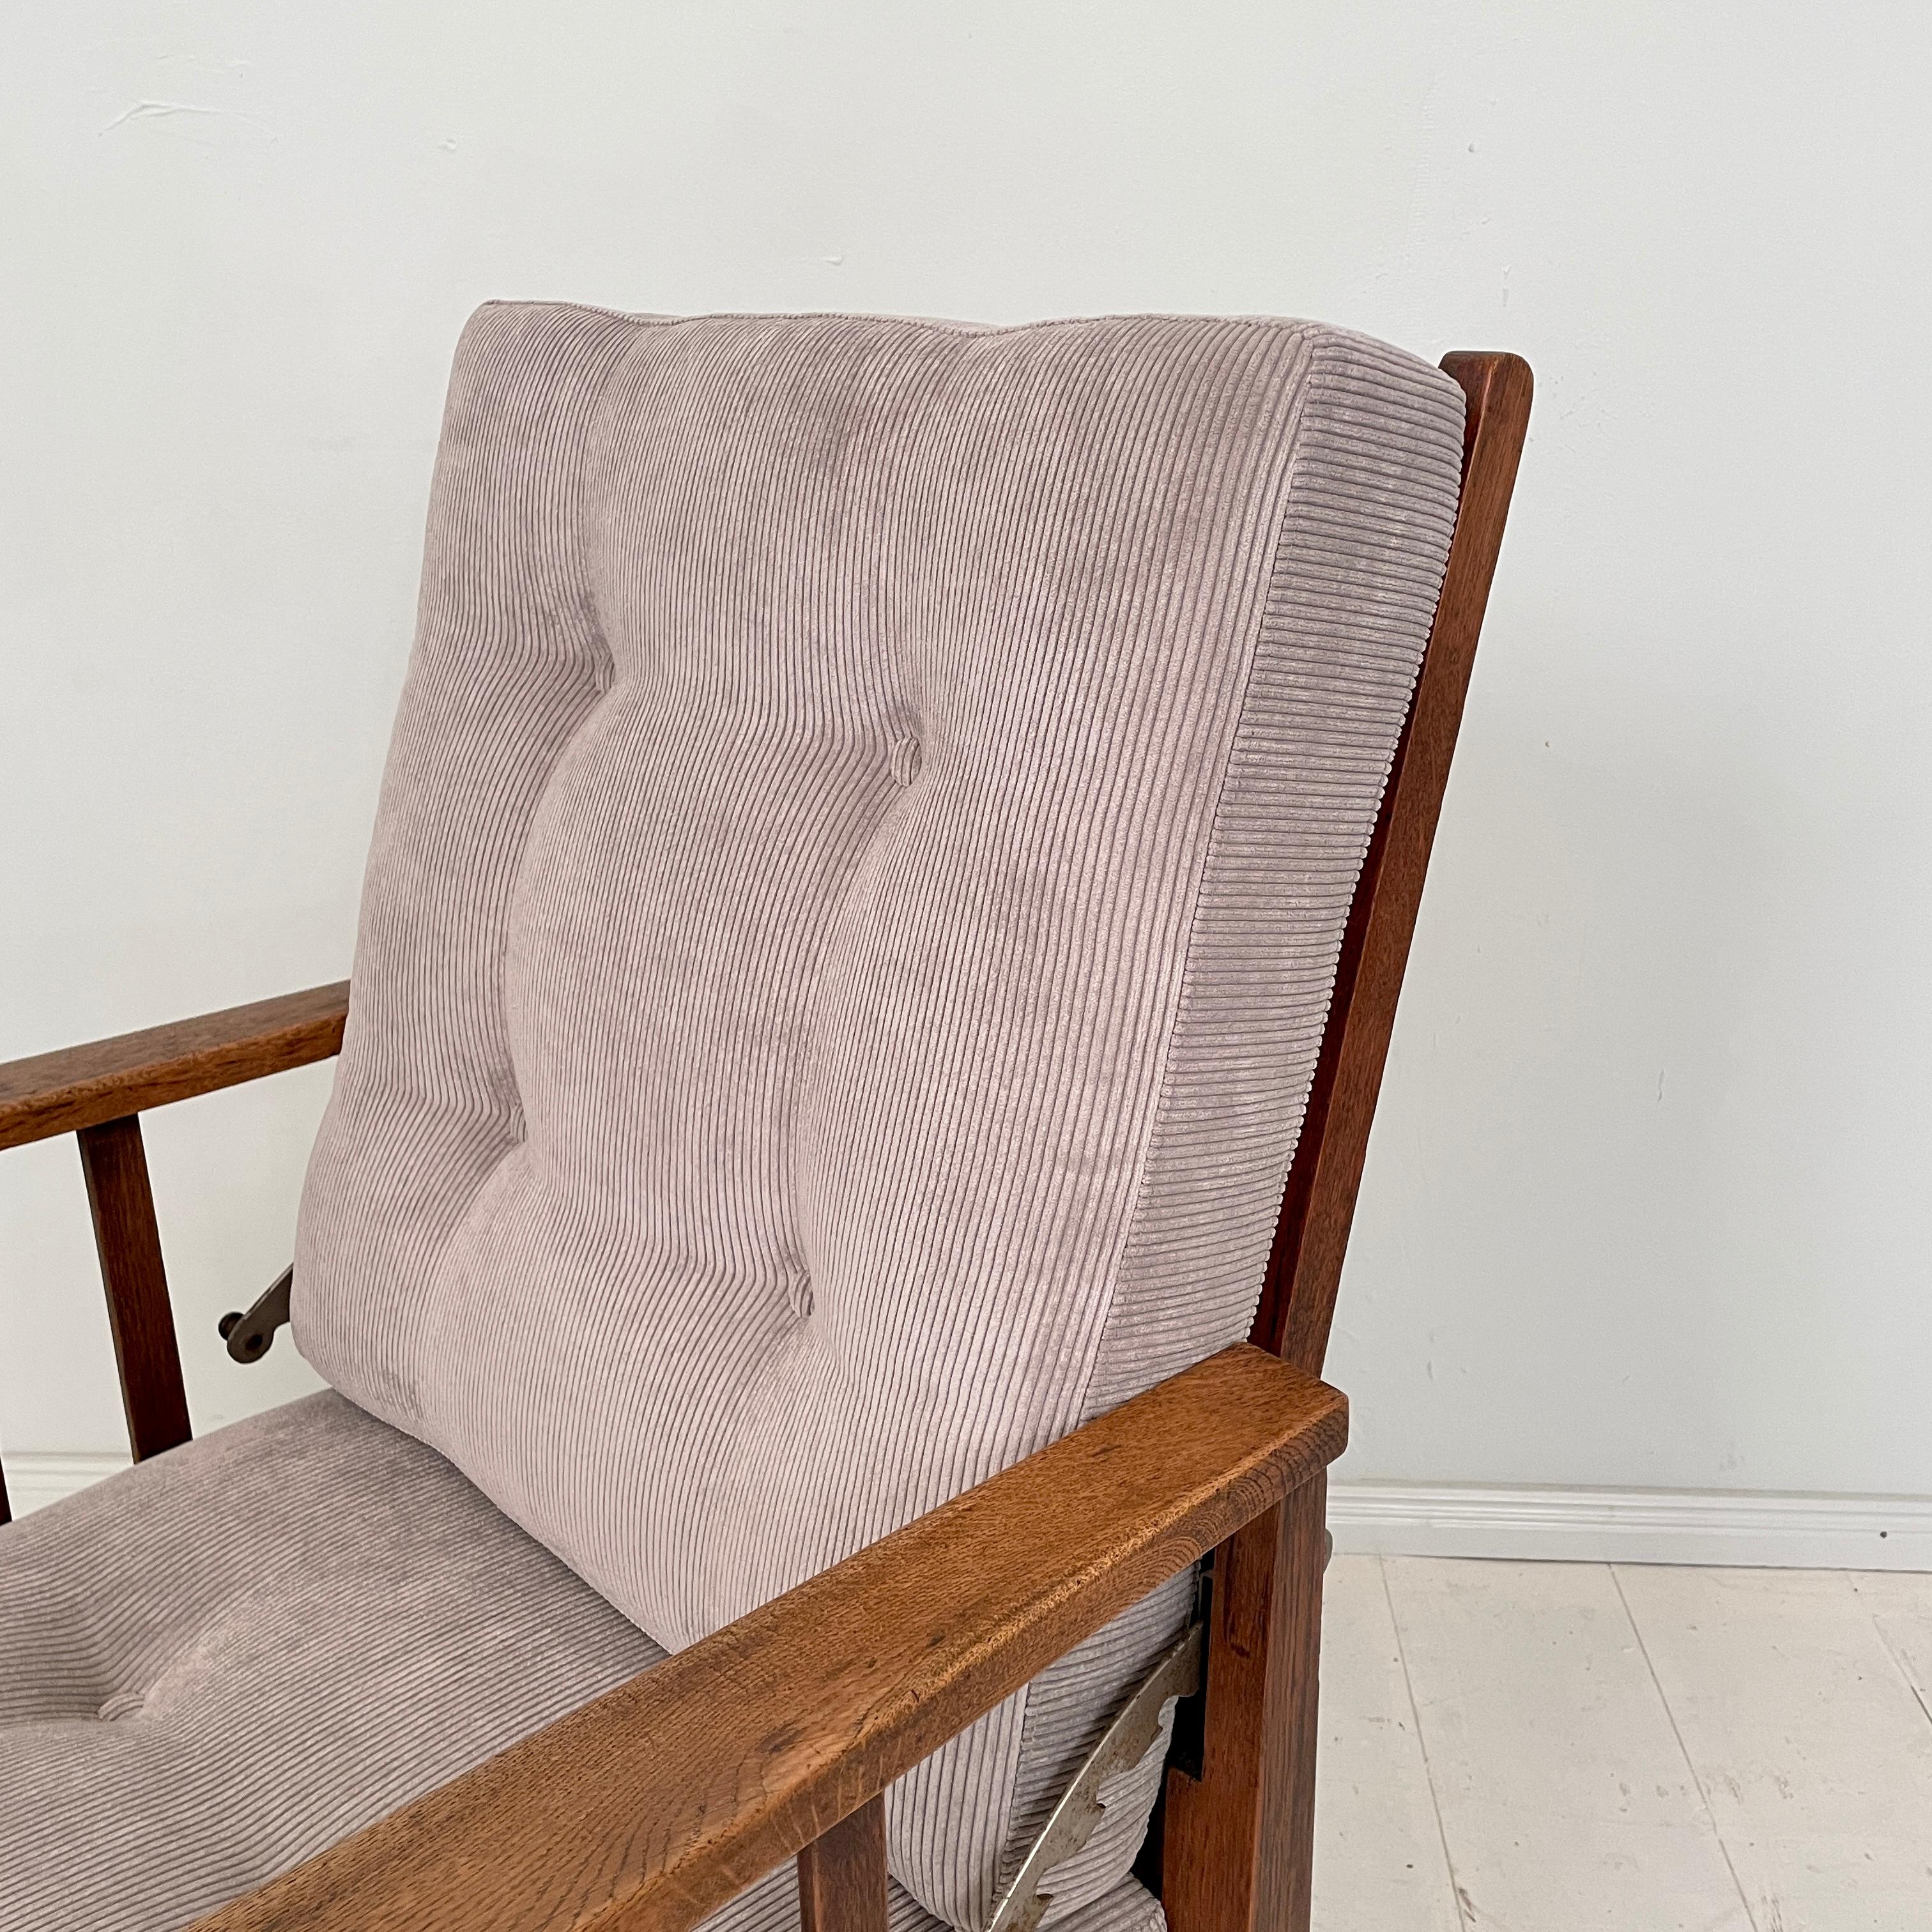 Early 20th Century English Arts and Crafts Morris Armchair in Oak Upholstered in Grey Cord, 1910